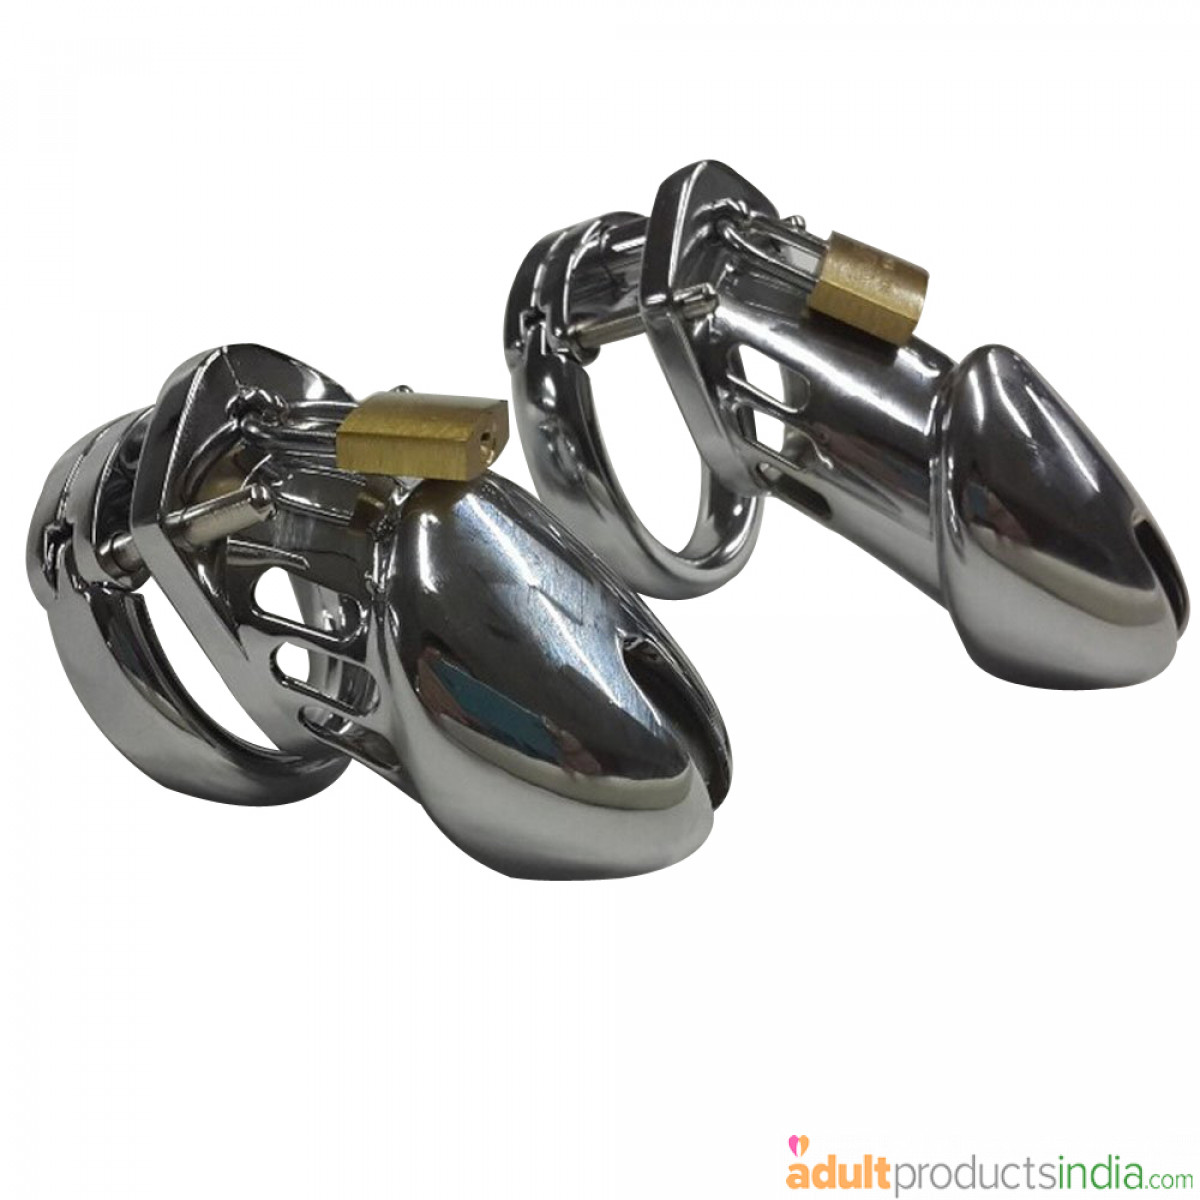 Short Metal Male Chastity Device - Adult Sex Toys Penis Male Defend Chastity Belt Lock Cage